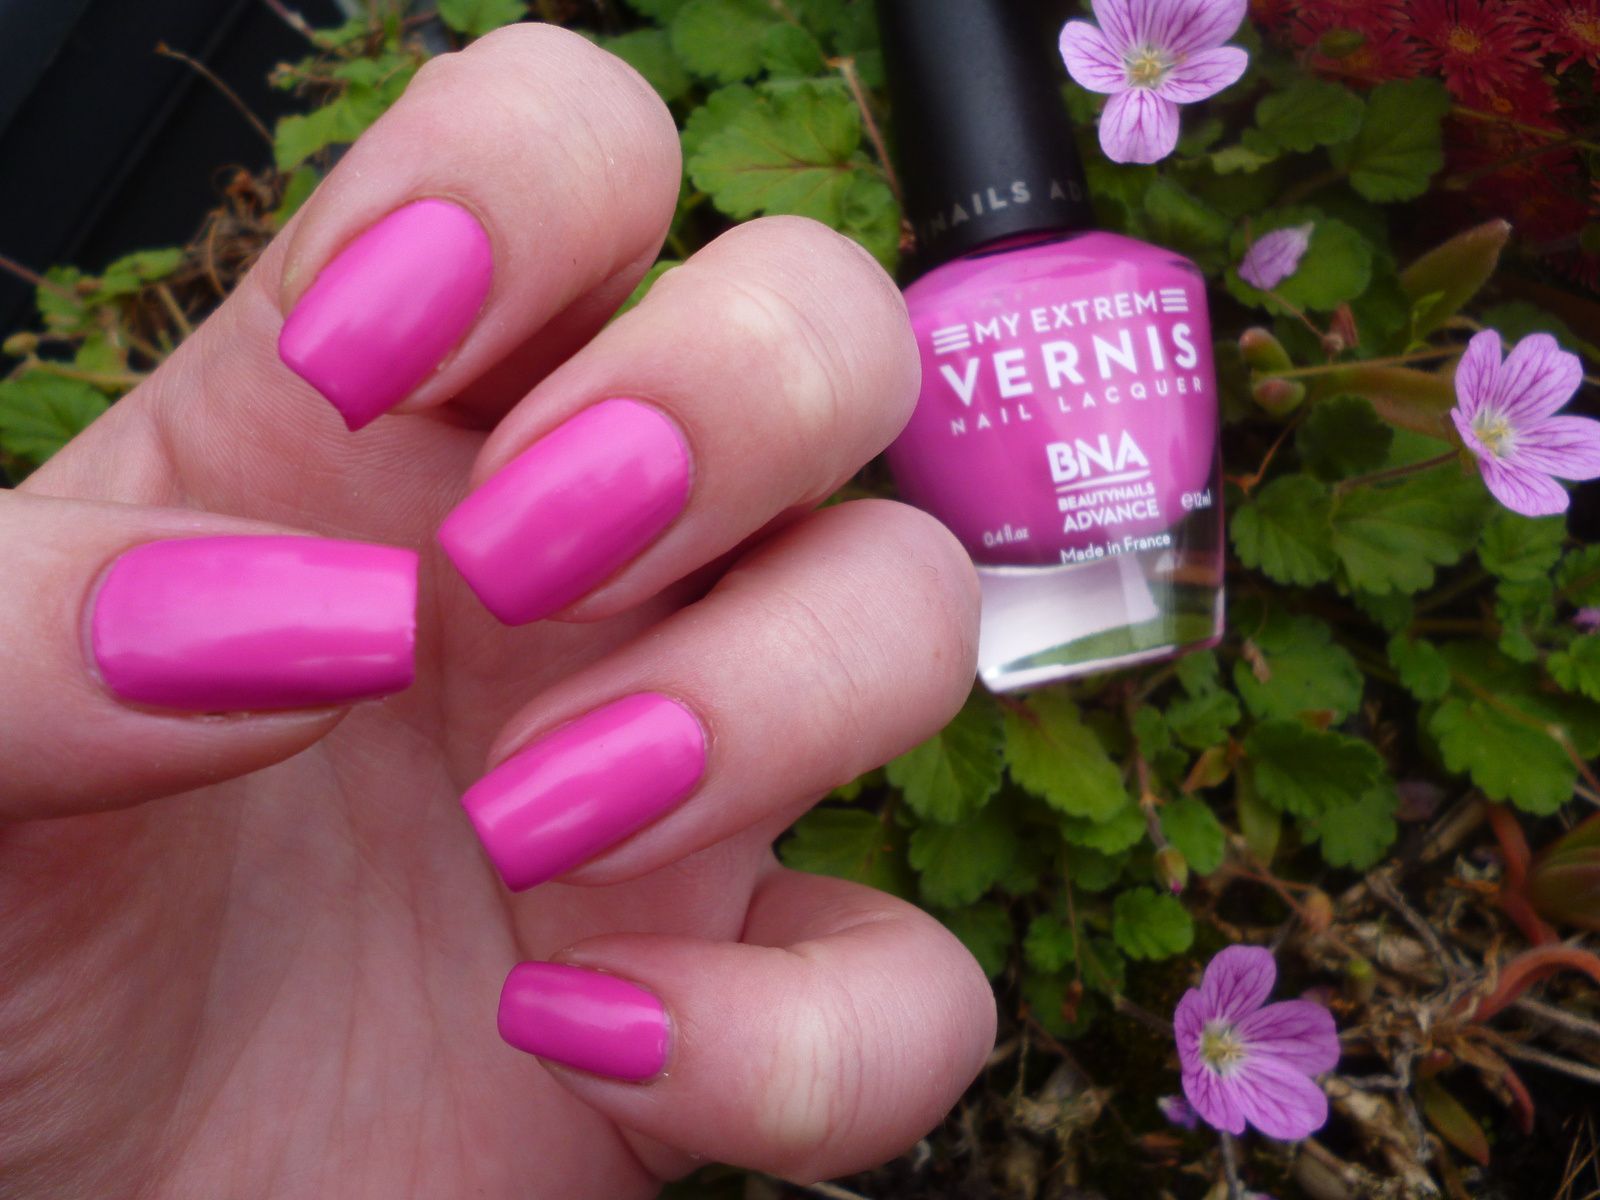 MY EXTREM VERNIS JUNGLE PINK - Beautynails